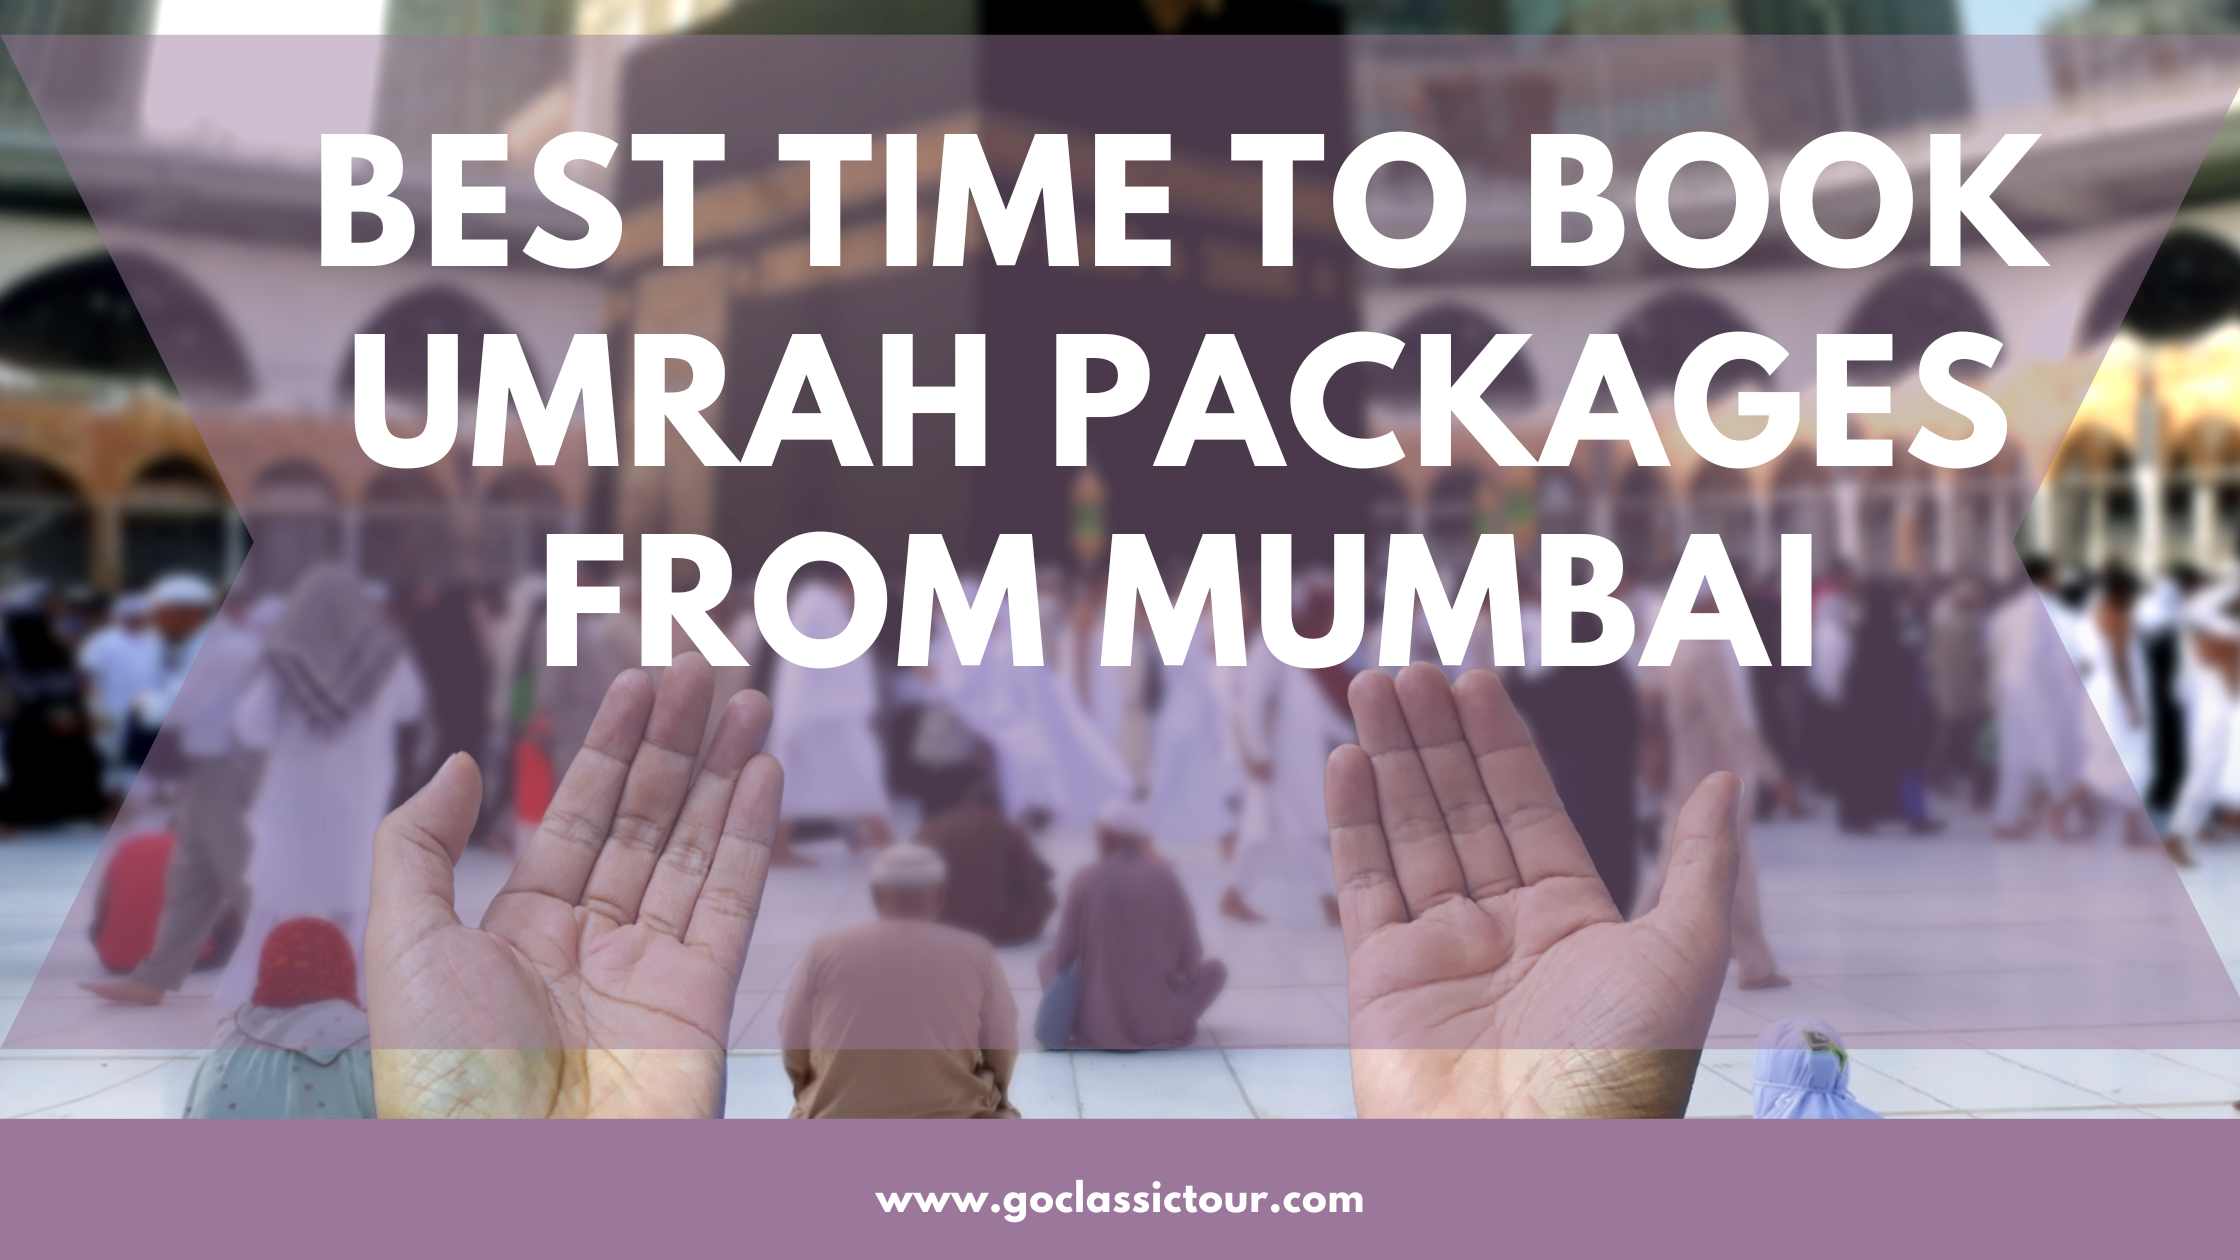 Best Time to Book Umrah Packages from Mumbai